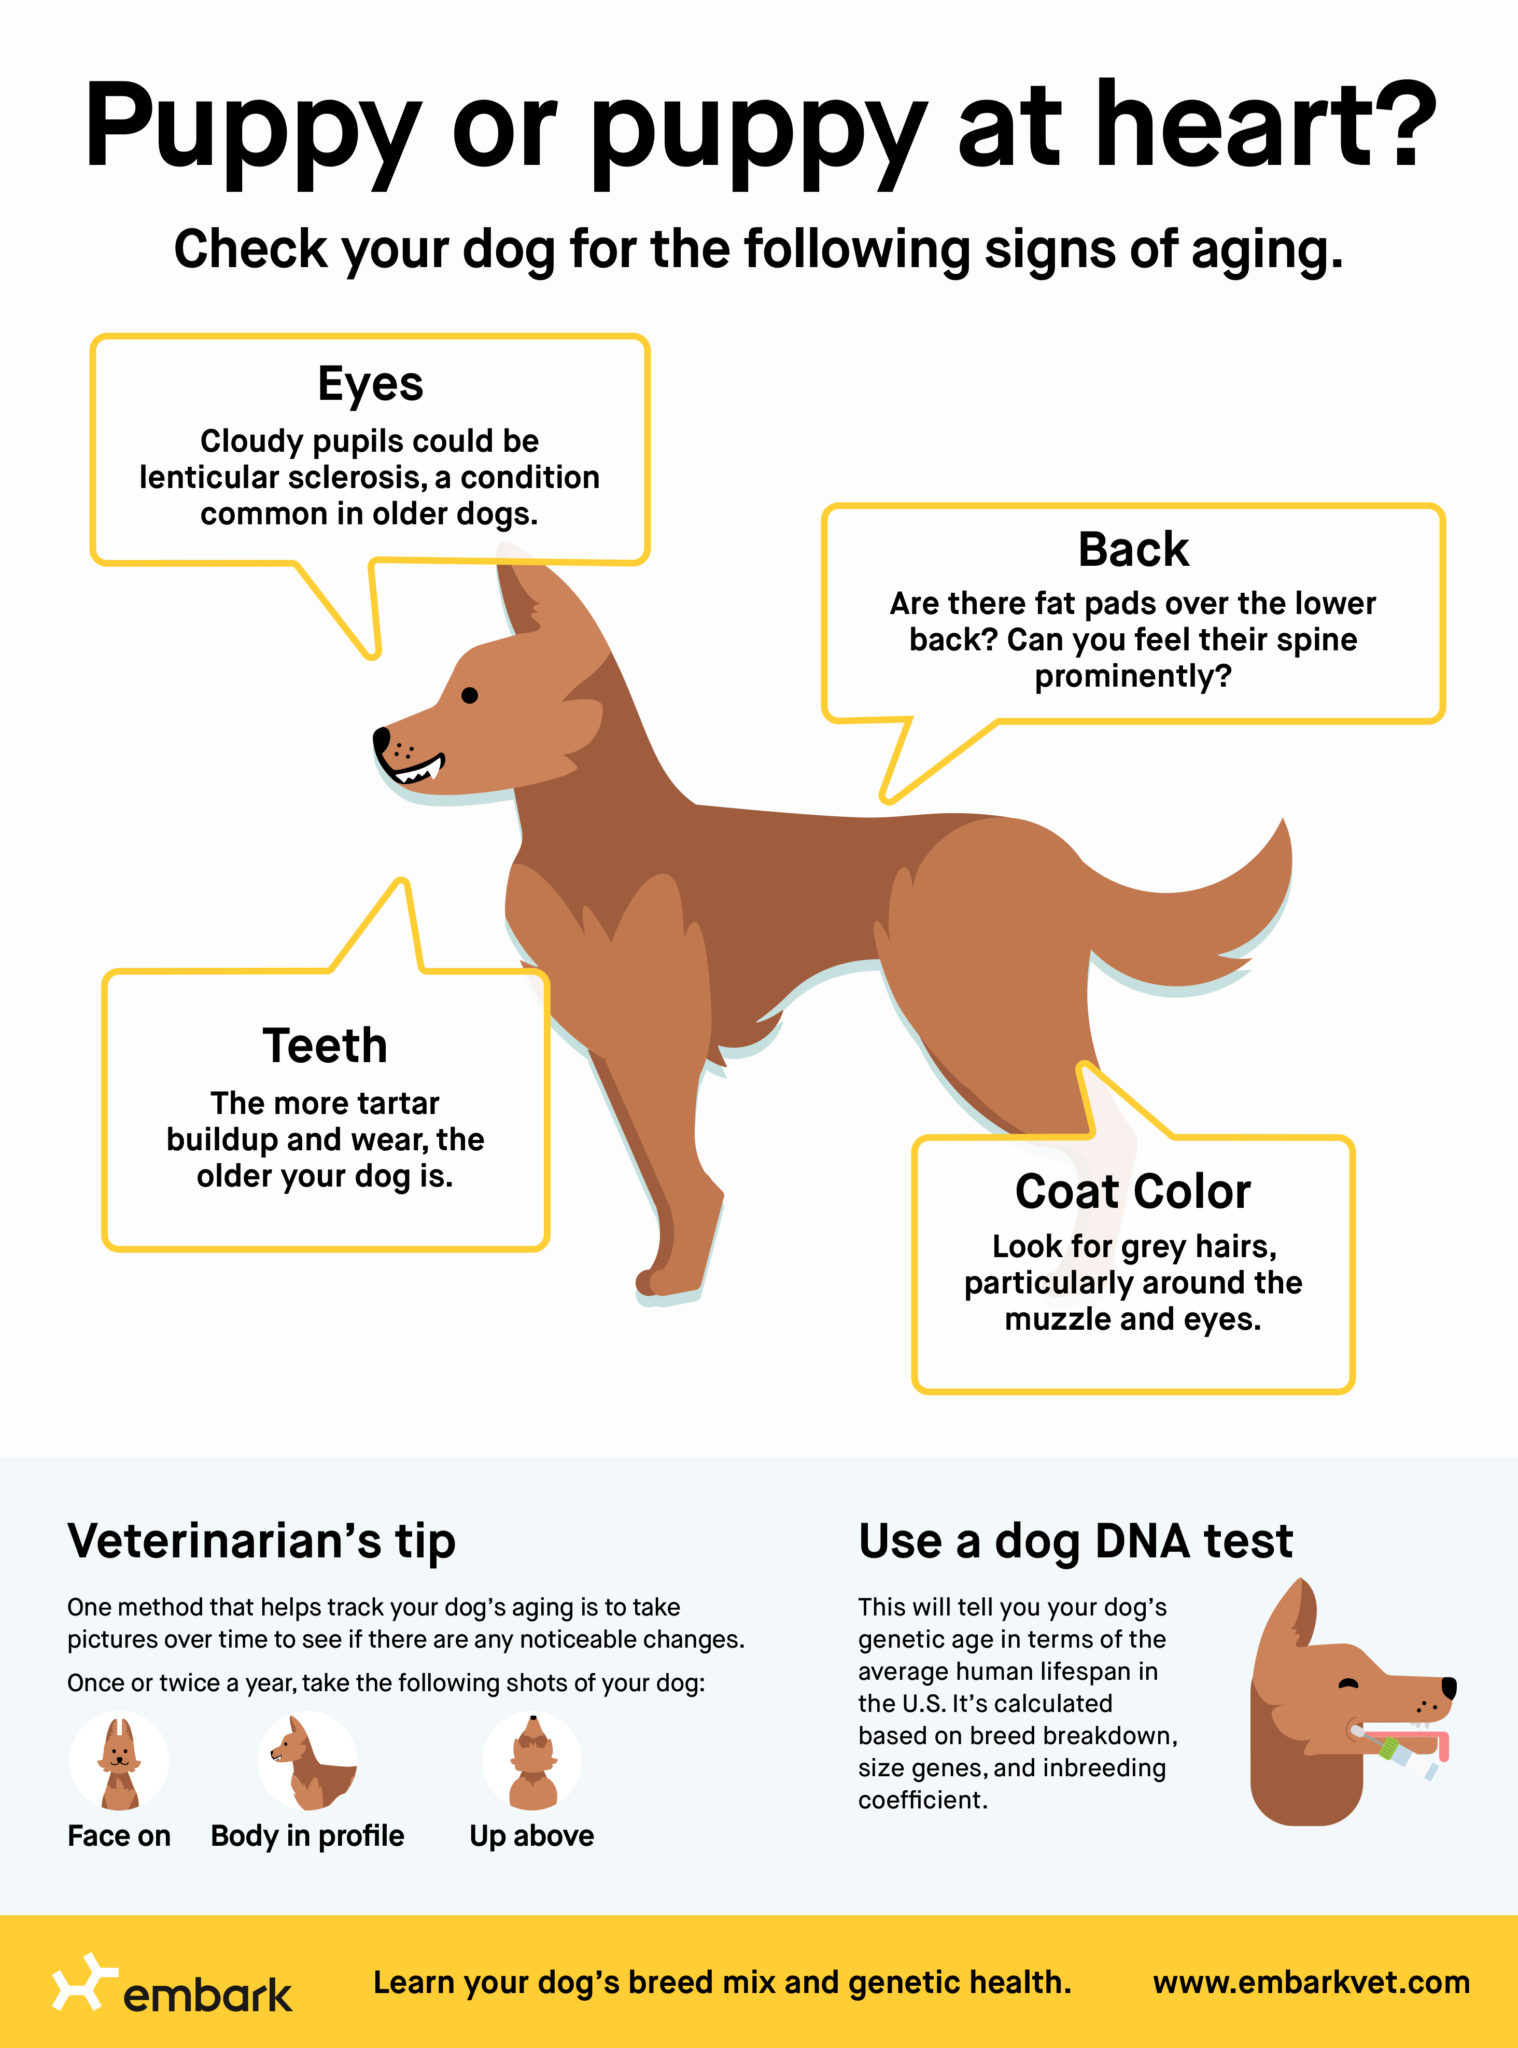 find out what breed your dog is